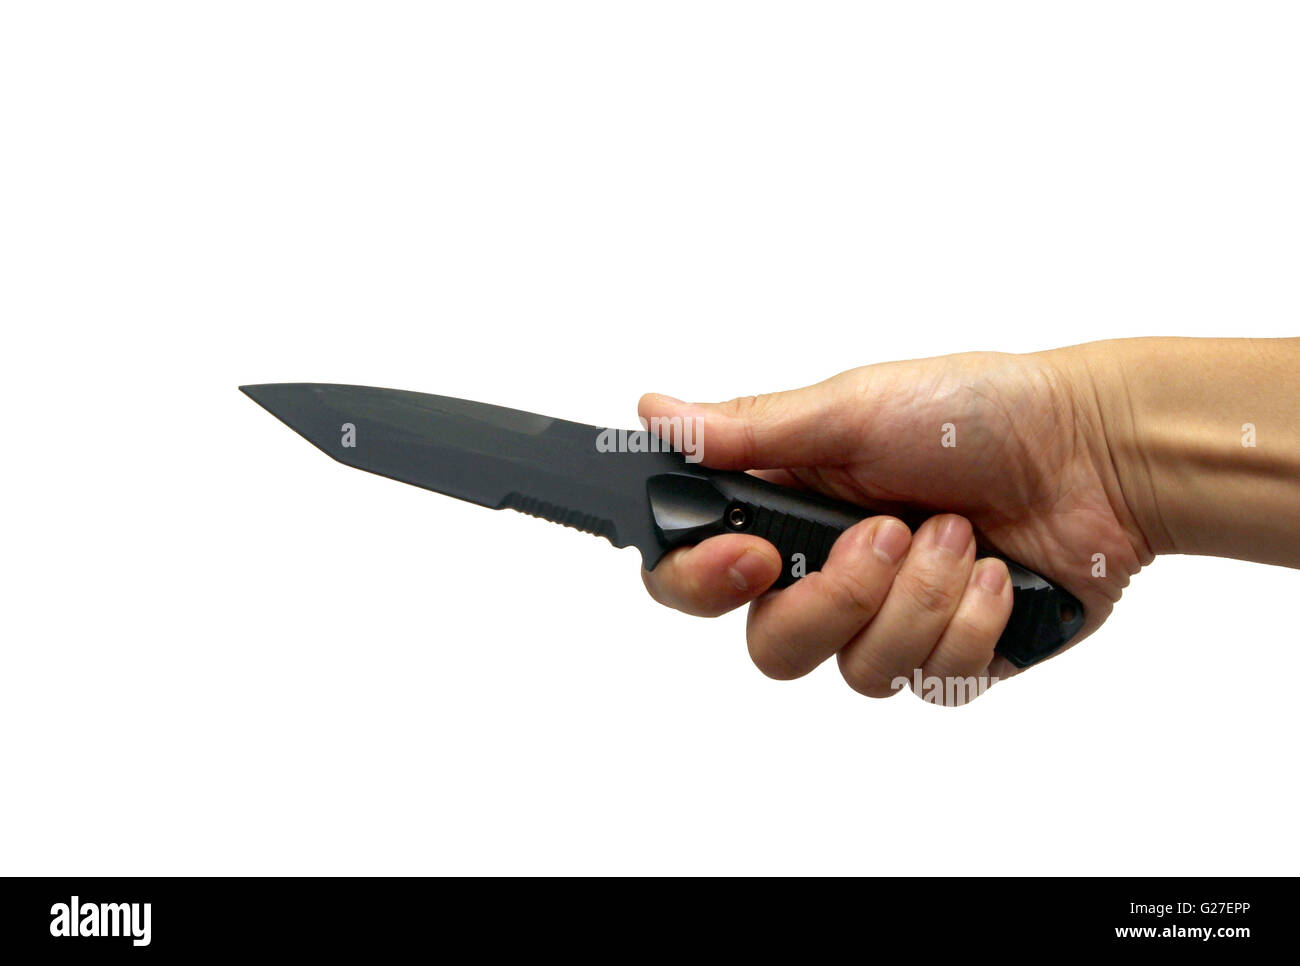 tactical knife military hand fight fright cut danger kill murder crime stab Stock Photo